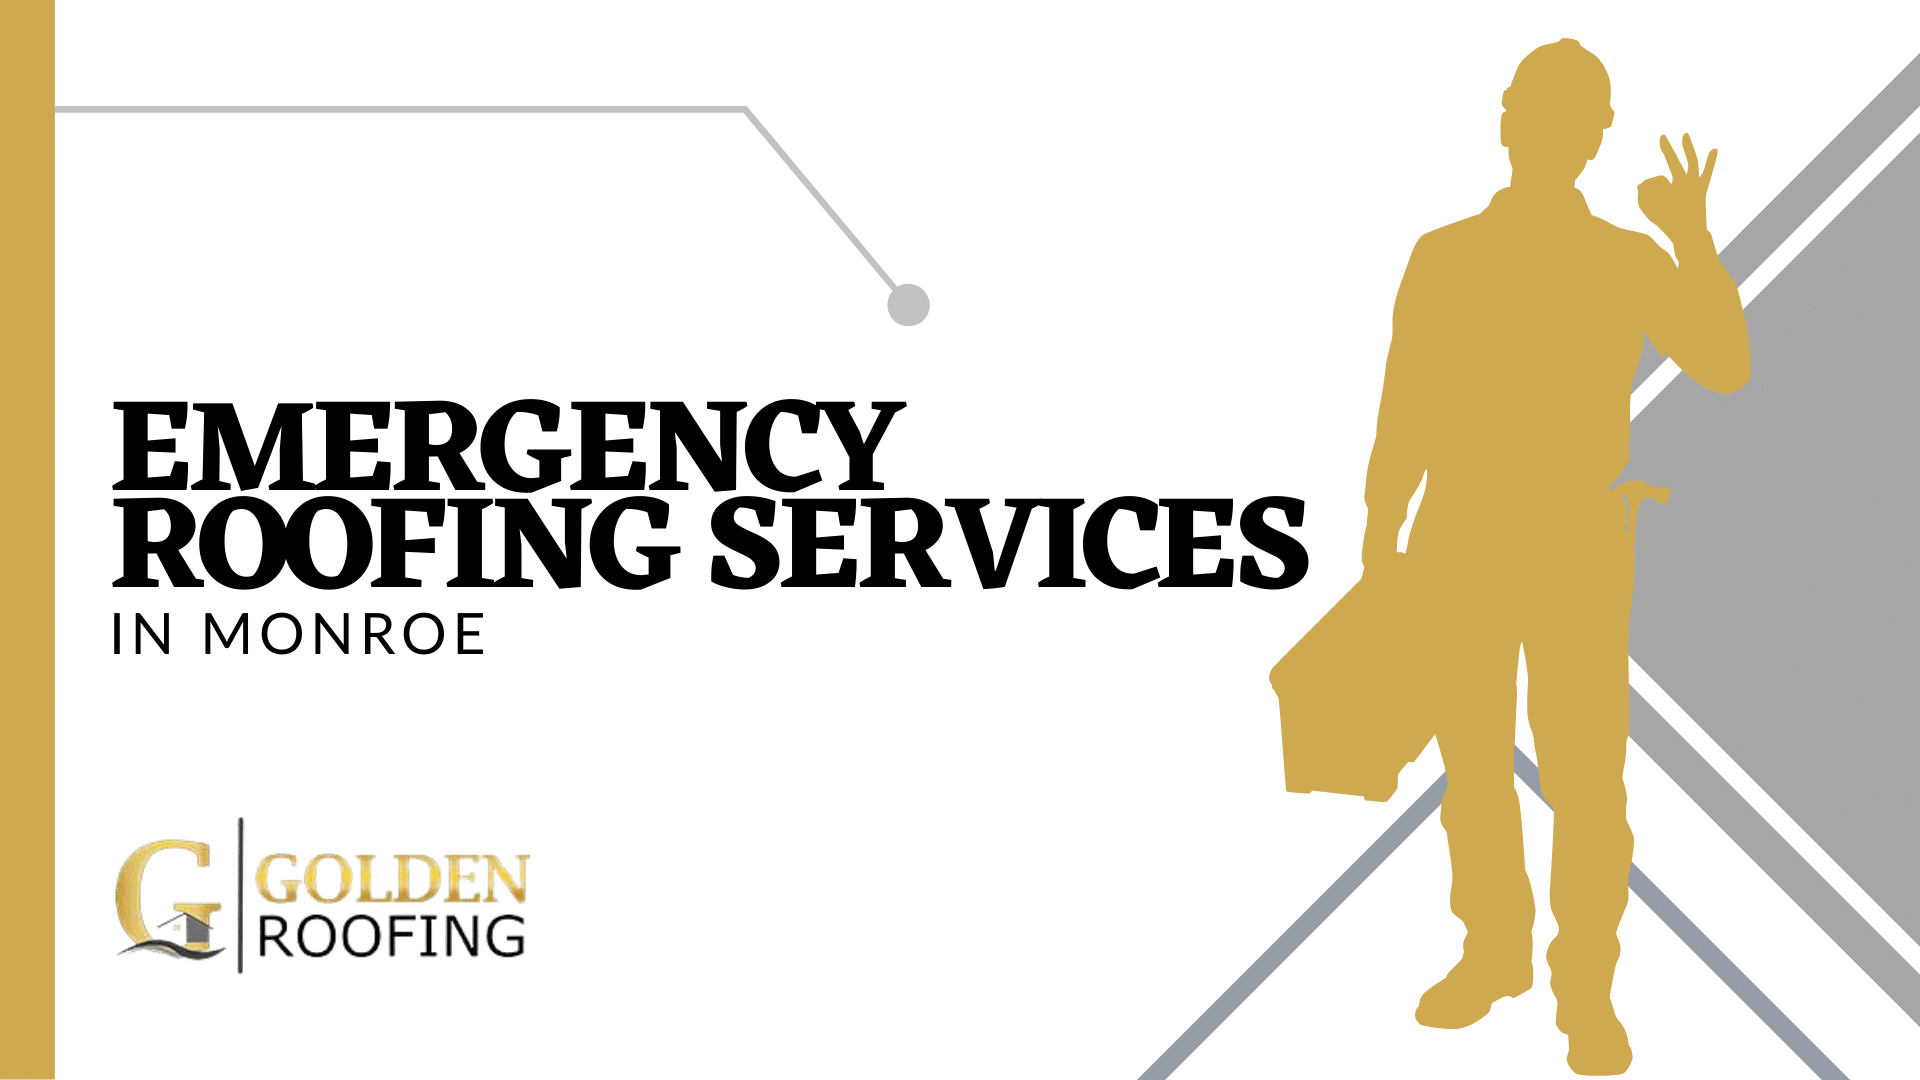 EMERGENCY ROOFING SERVICES